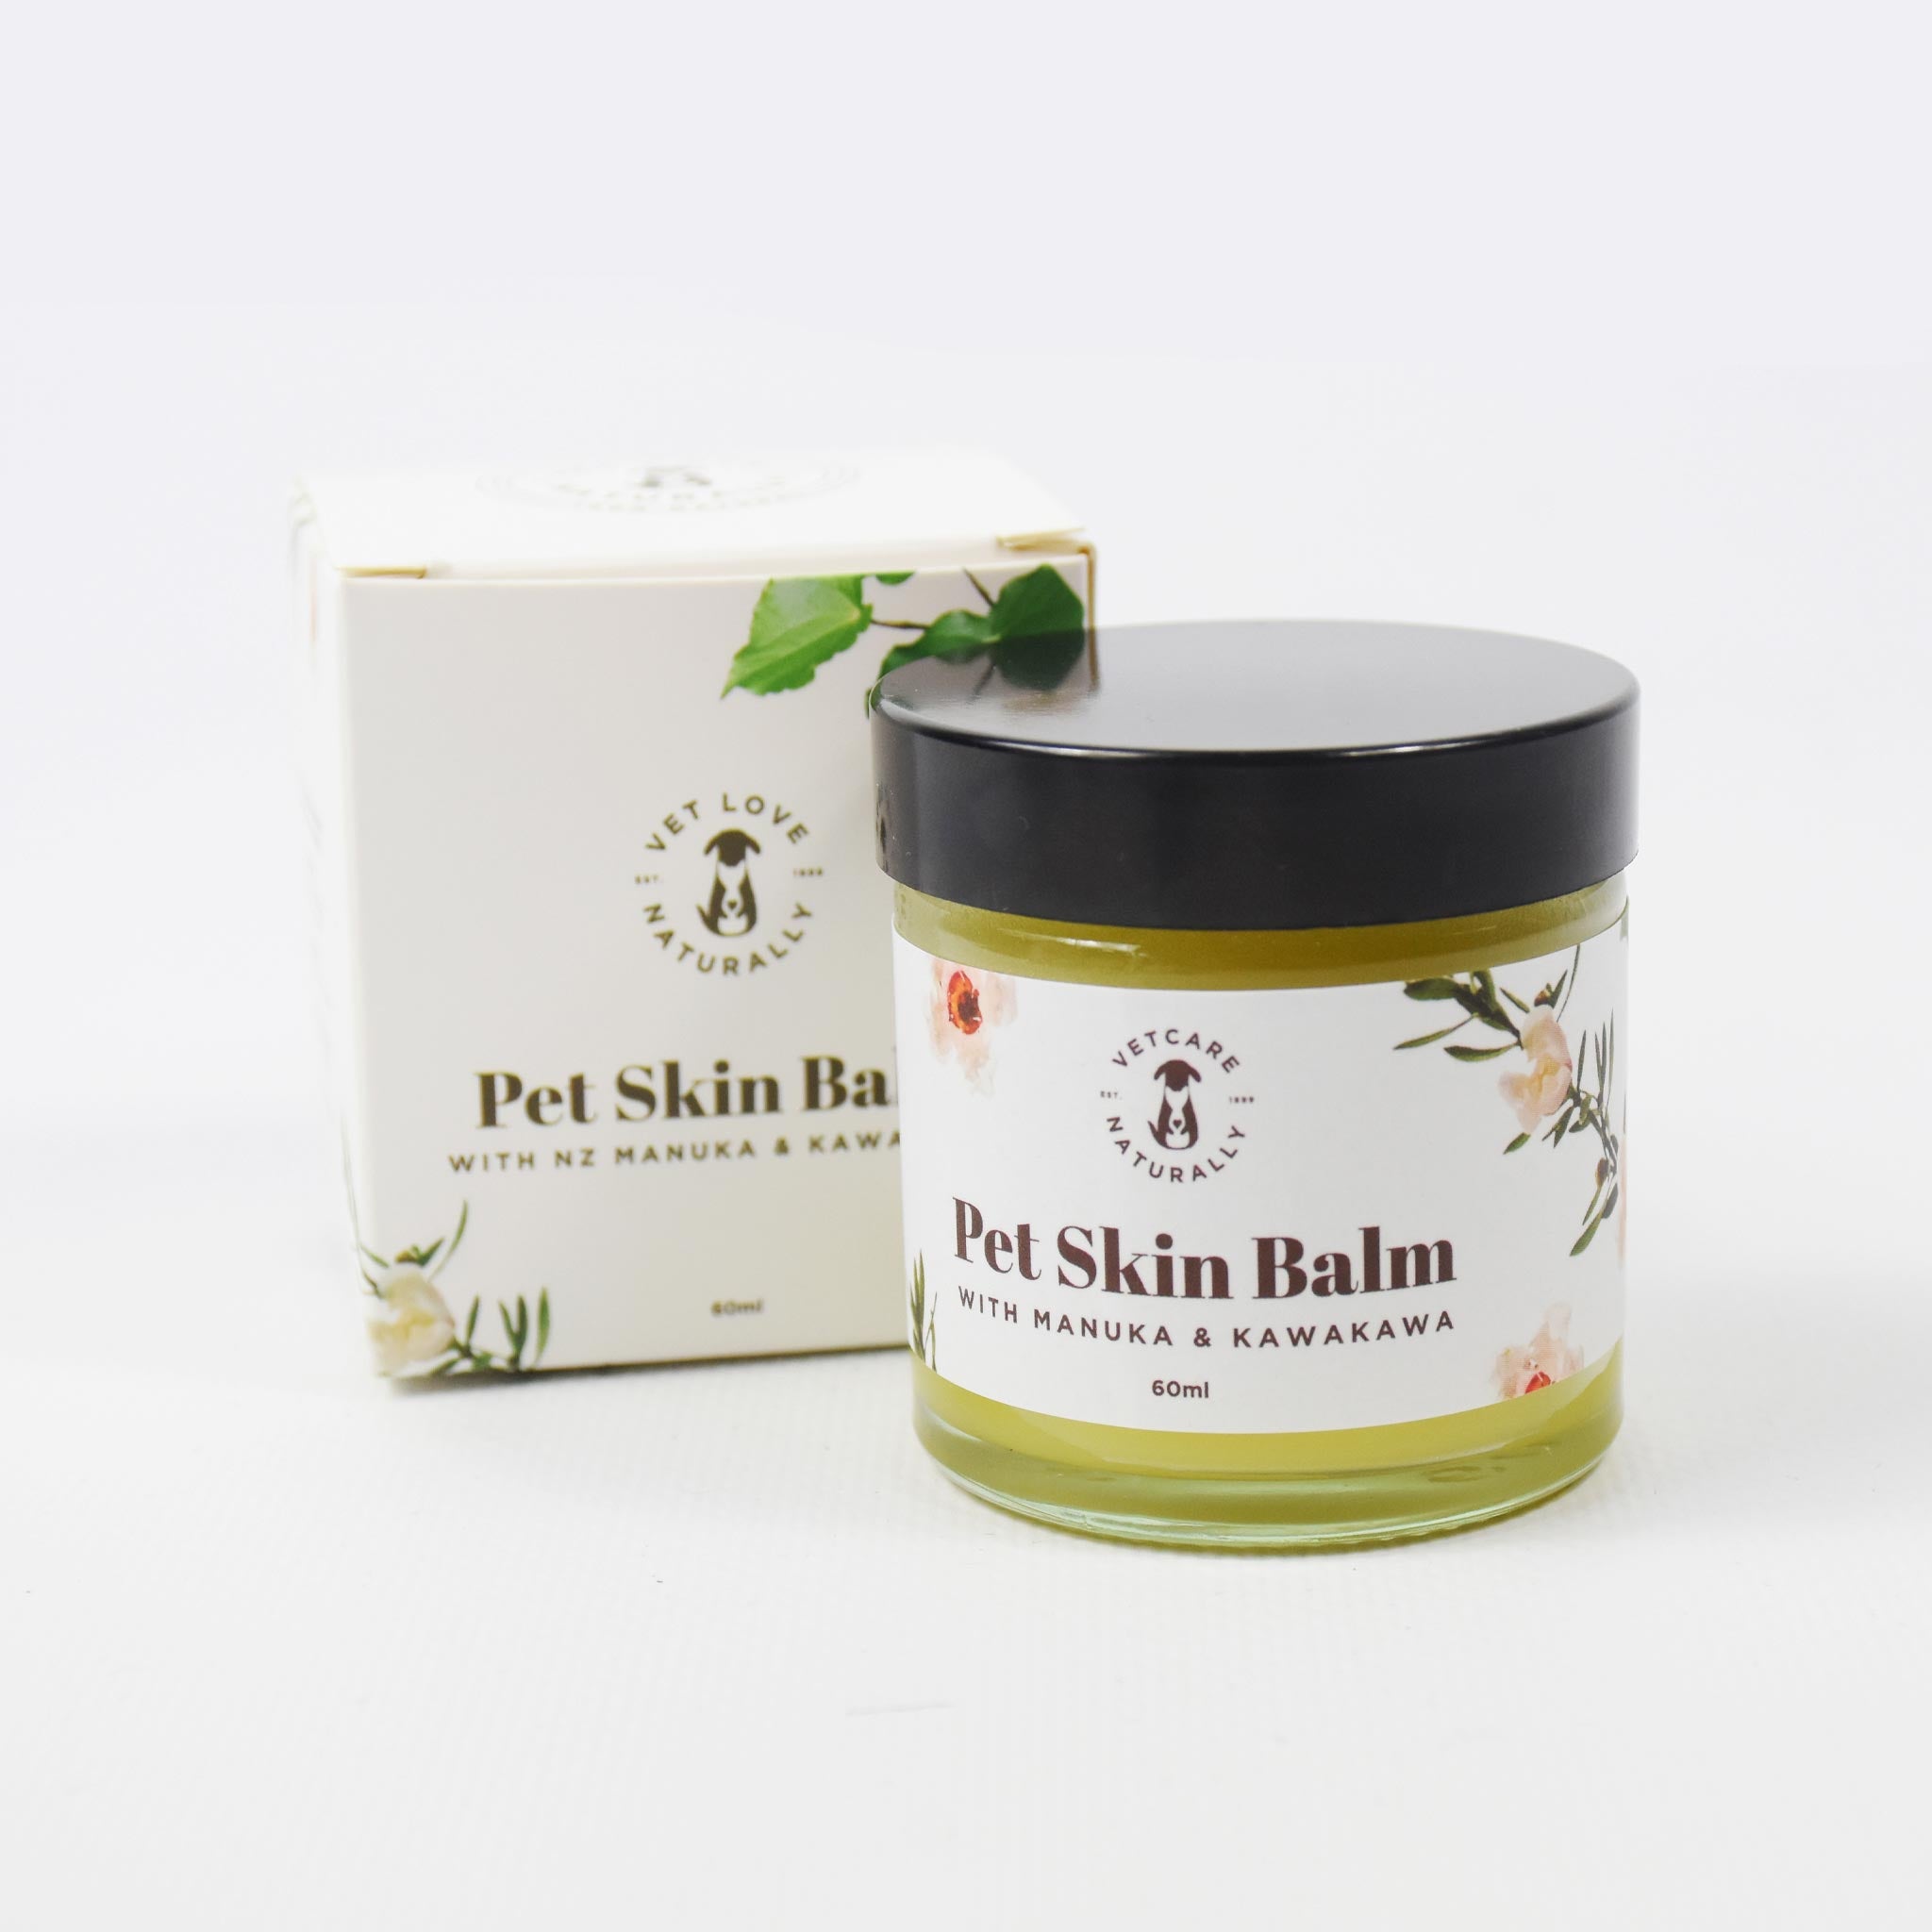 Packaging of the Olive's Kitchen Pet Skin Balm